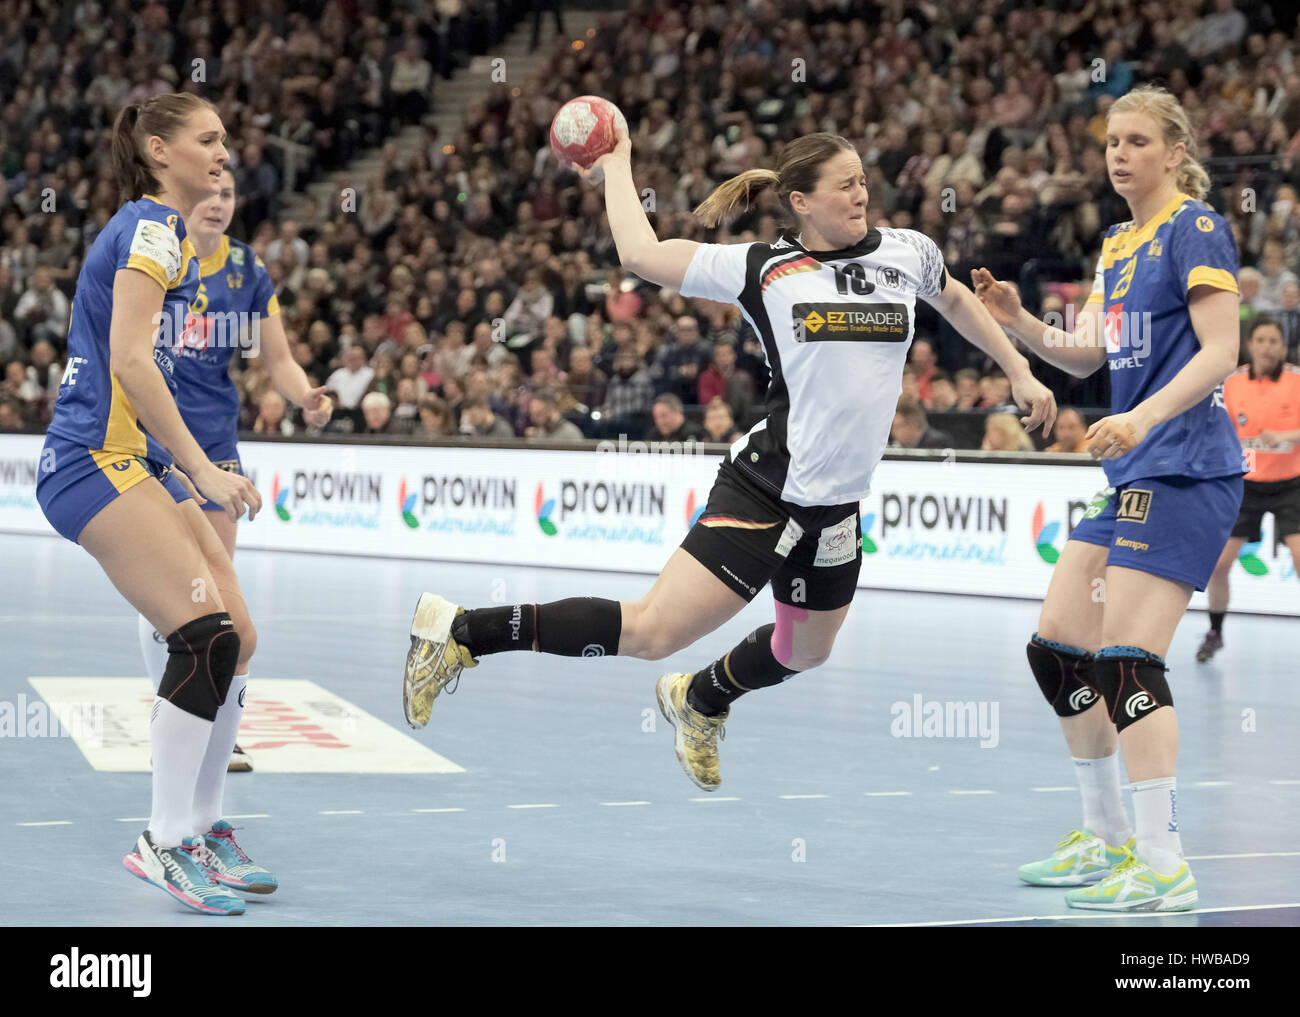 Hamburg, Germany. 19th Mar, 2017. Germany's Anna Loerper (M) scores against Sweden's Marie Wall (L) and Jenny Alm during the women's handball match between Germany and Sweden at the Barclaycard Arena in Hamburg, Germany, 19 March 2017. The match ended 23-24. Photo: Axel Heimken/dpa/Alamy Live News Stock Photo